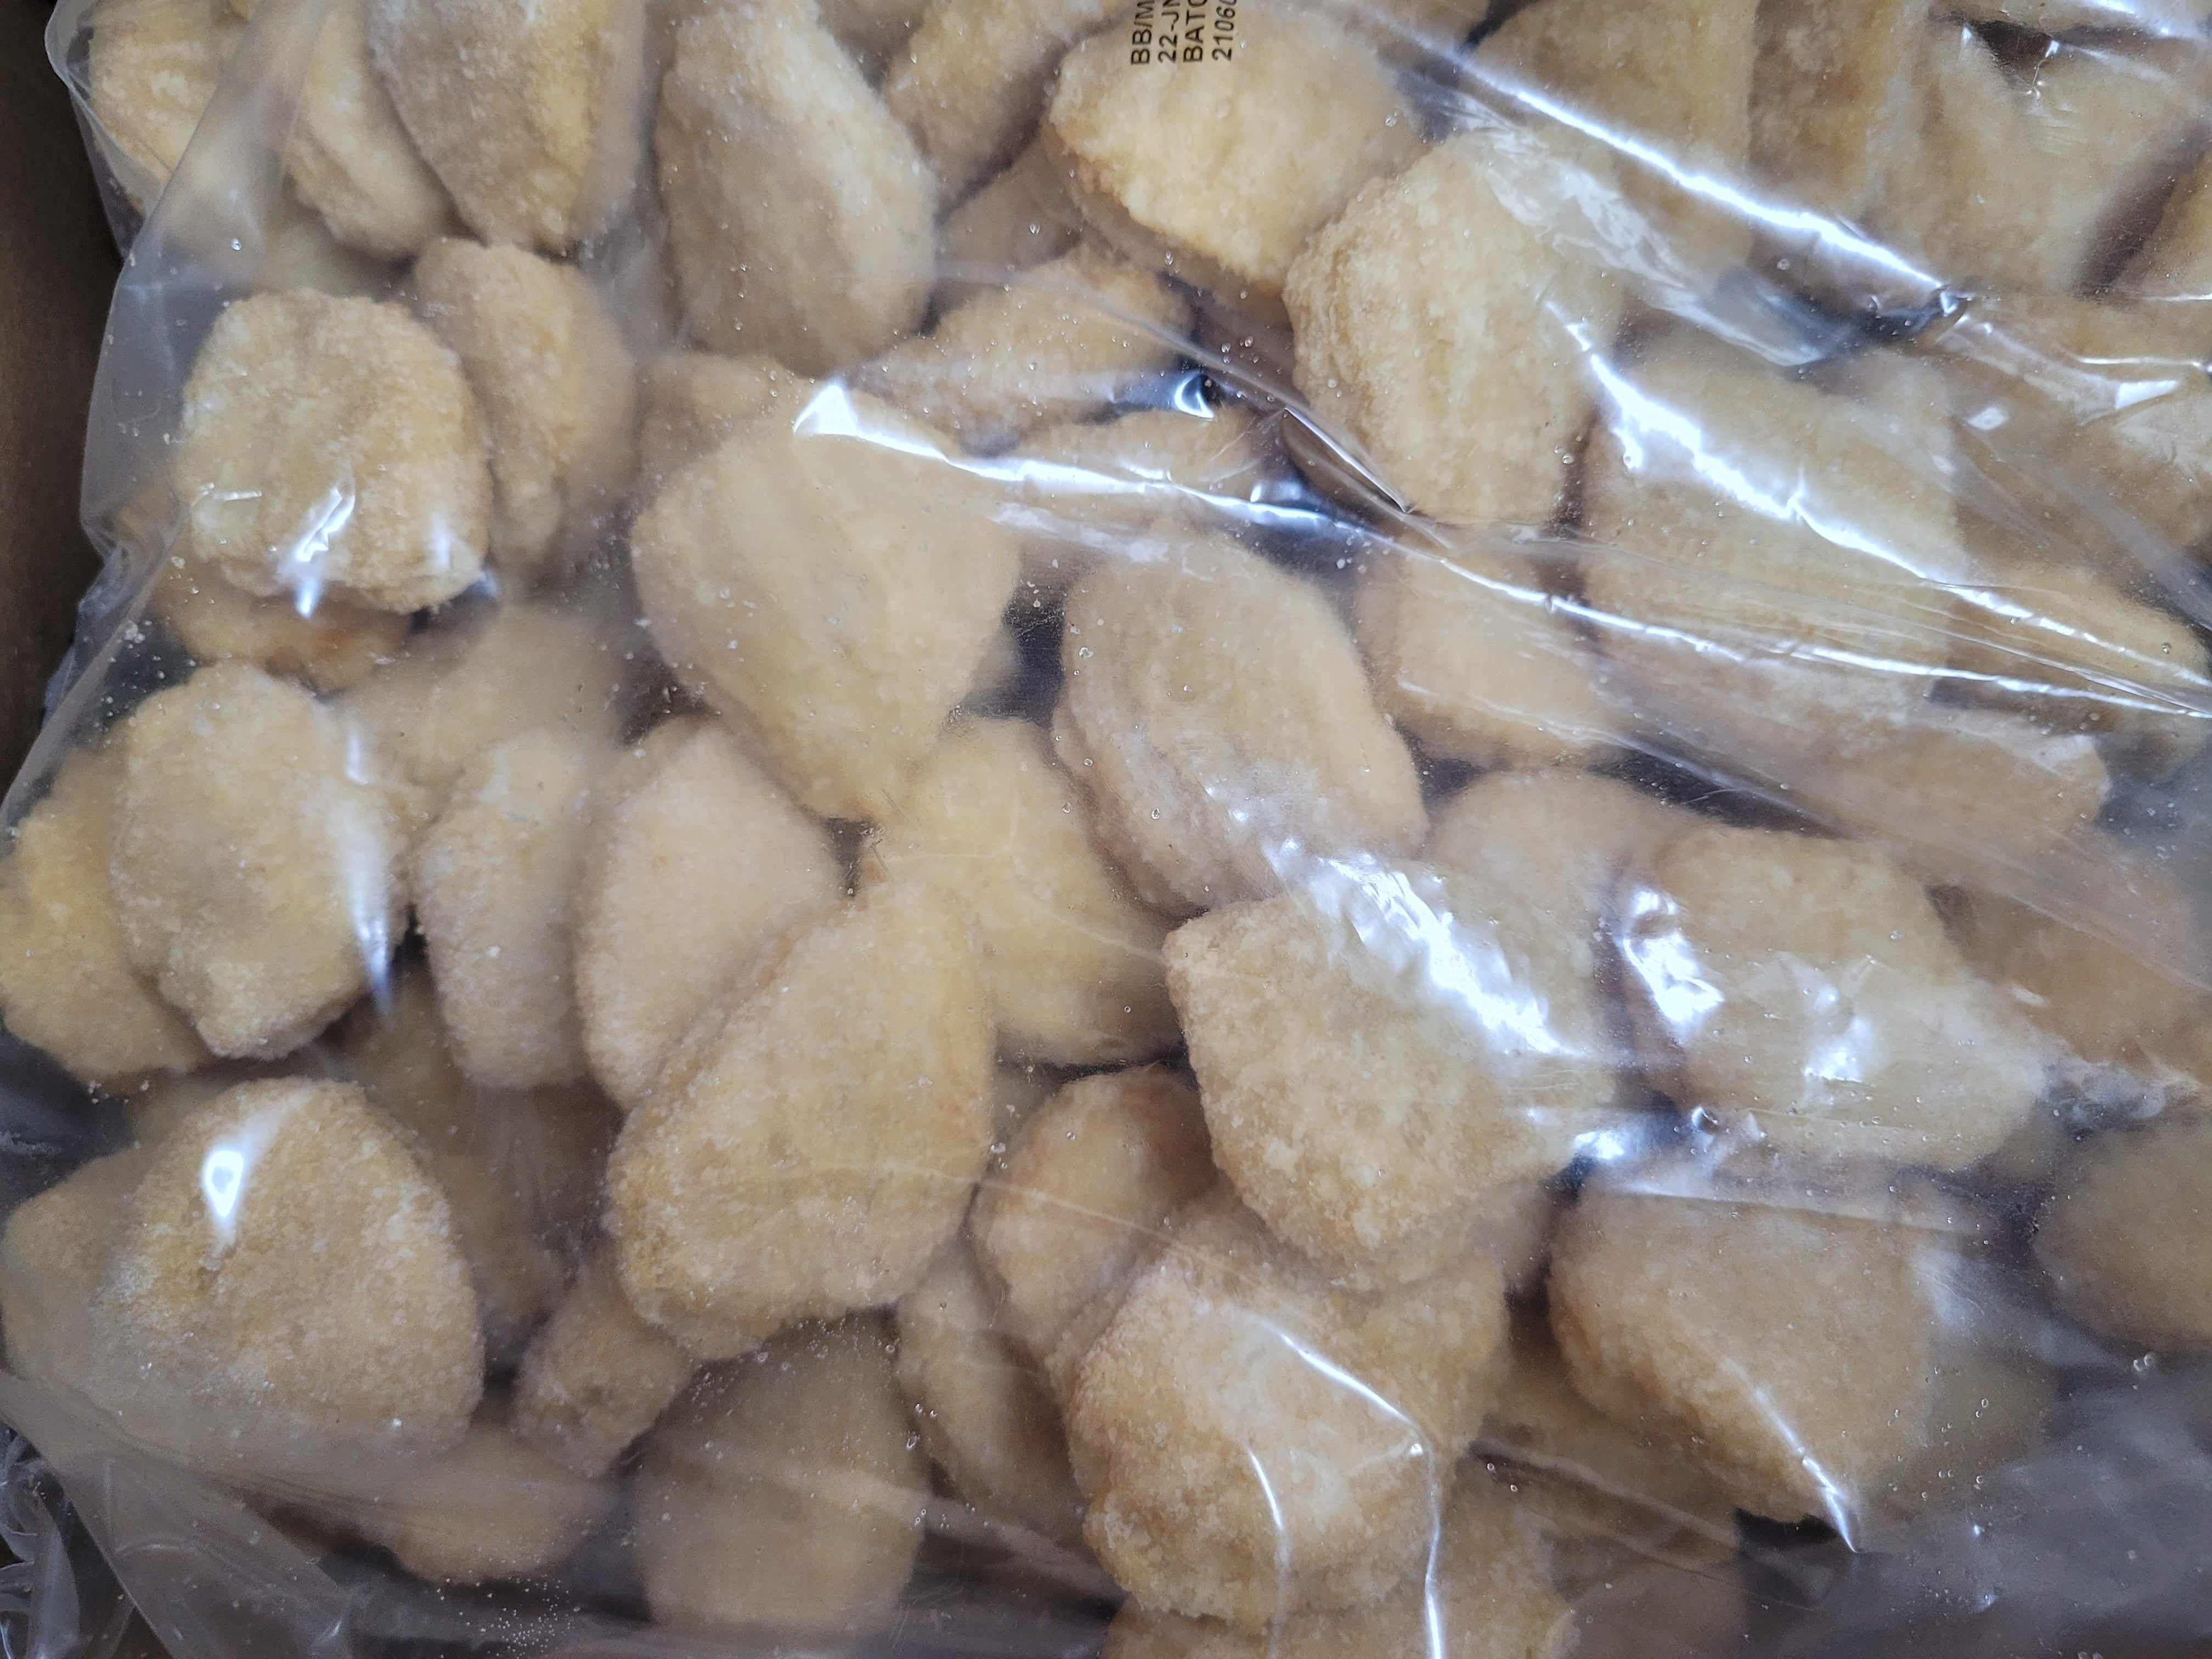 Erie Meats Fully Cooked Chicken Nuggets - Frozen